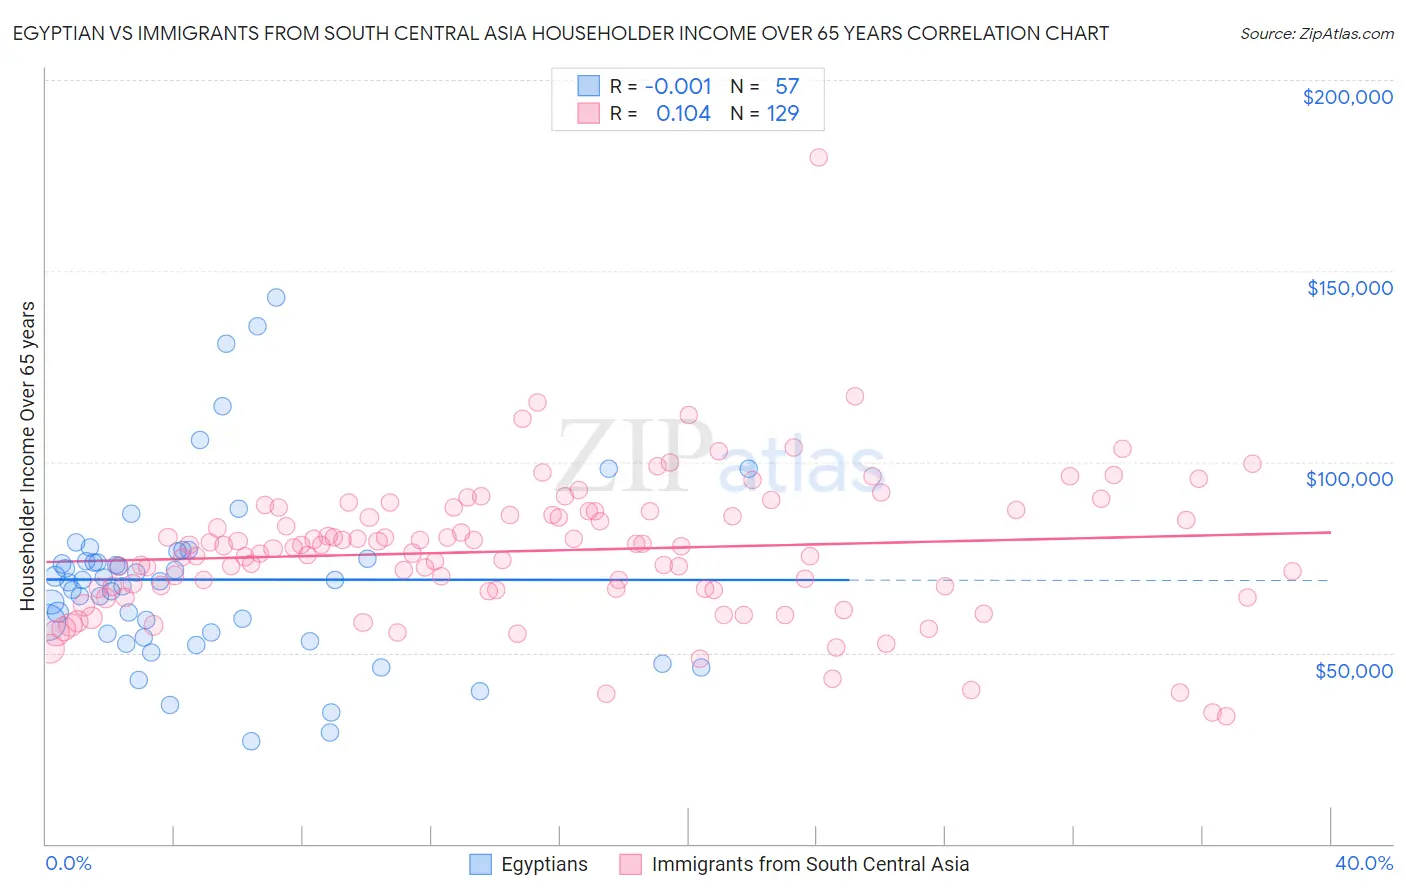 Egyptian vs Immigrants from South Central Asia Householder Income Over 65 years